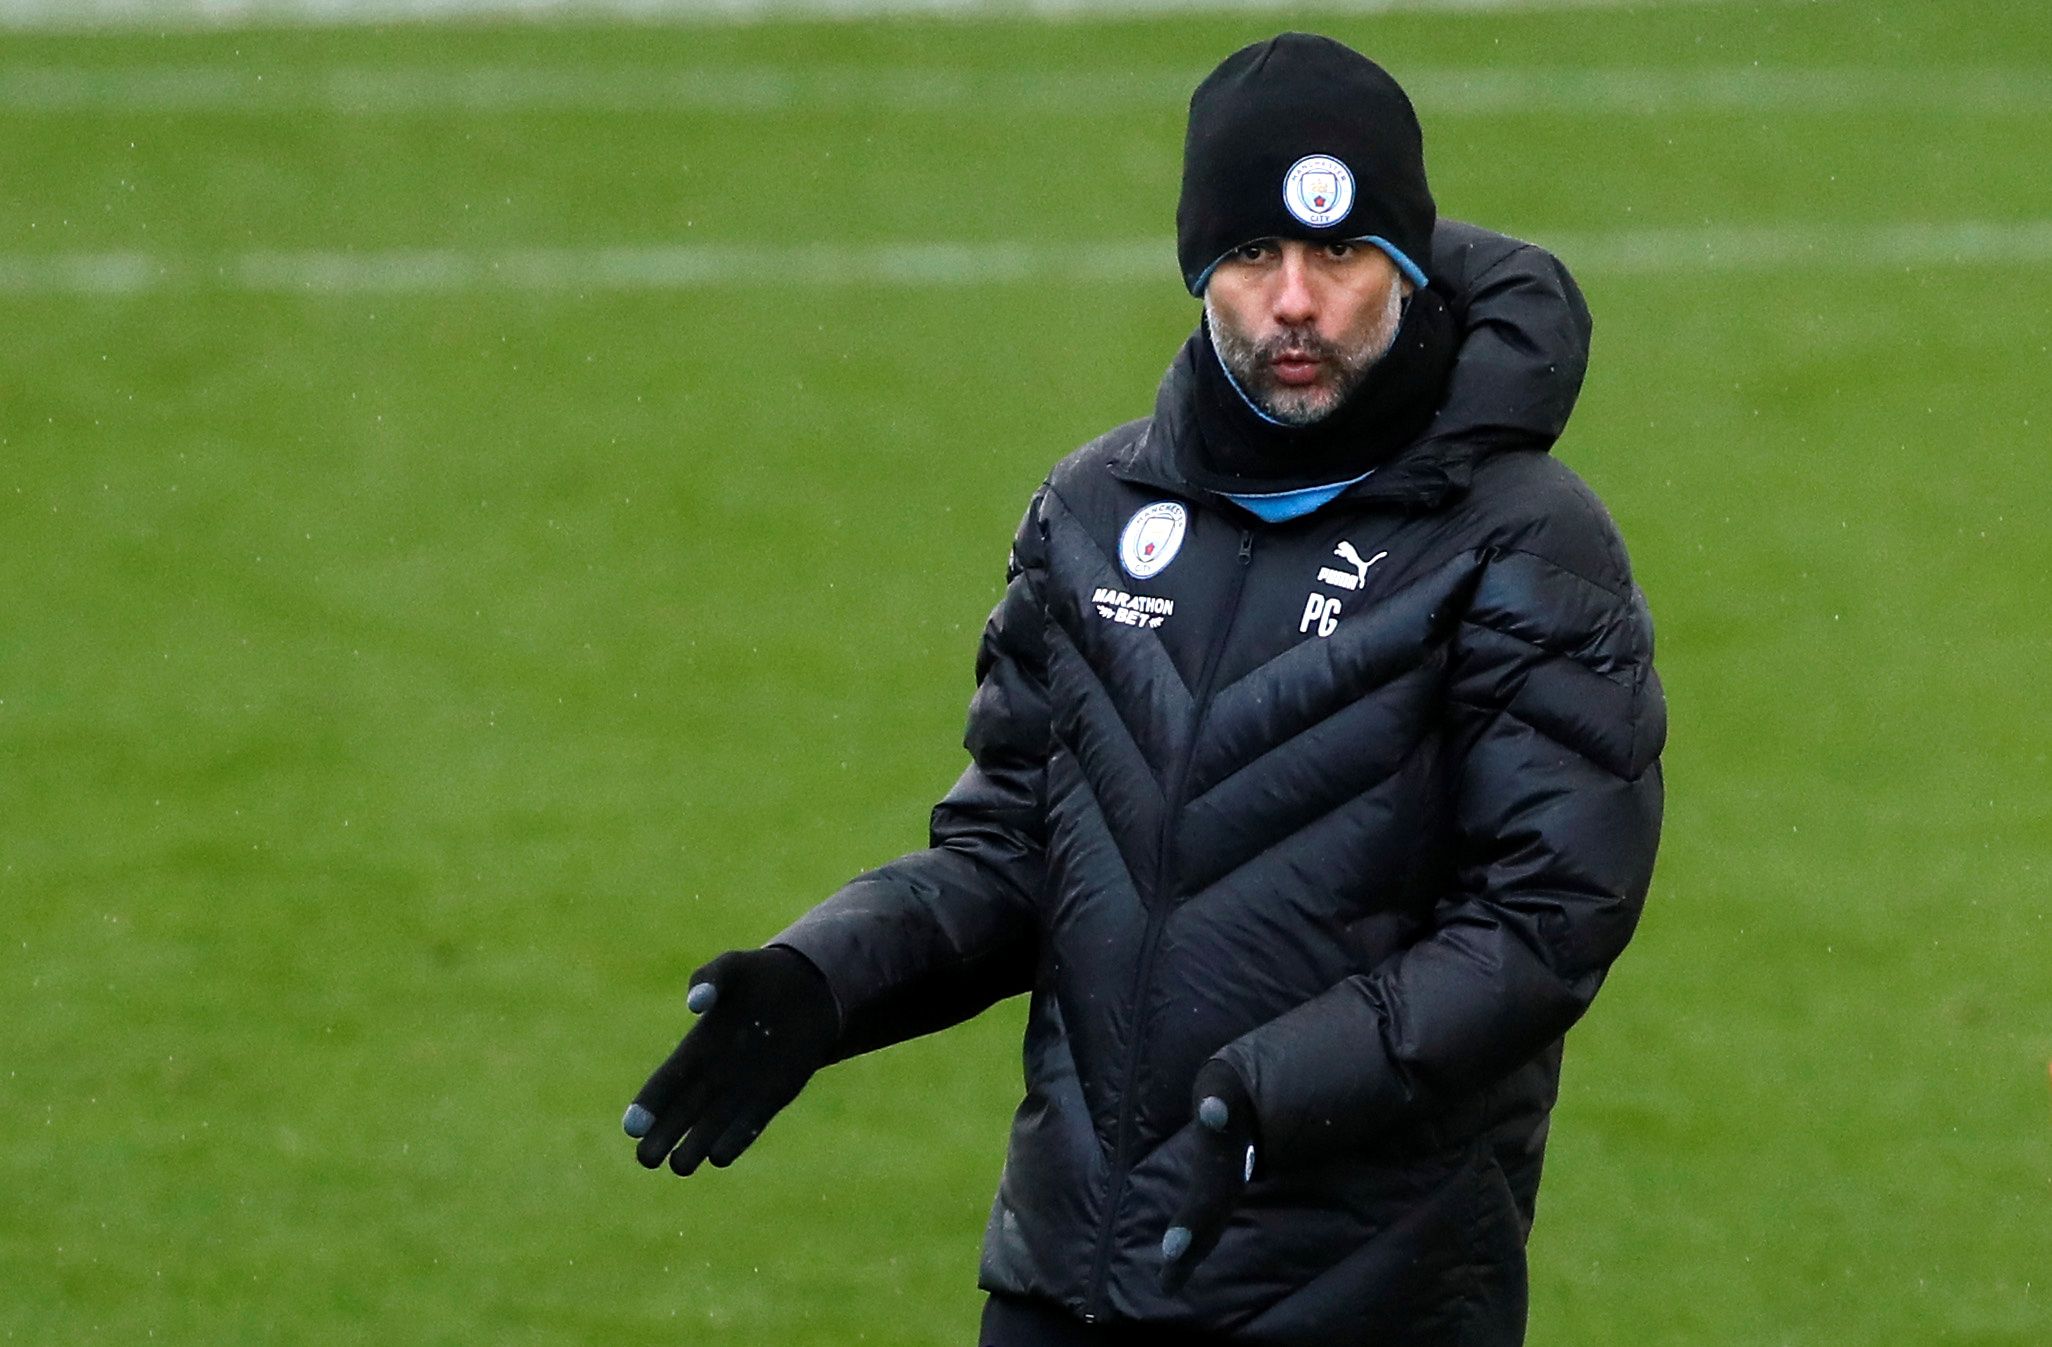 Soccer Football - Champions League - Manchester City Training - Etihad Campus, Manchester, Britain - February 25, 2020   Manchester City manager Pep Guardiola during training   Action Images via Reuters/Jason Cairnduff